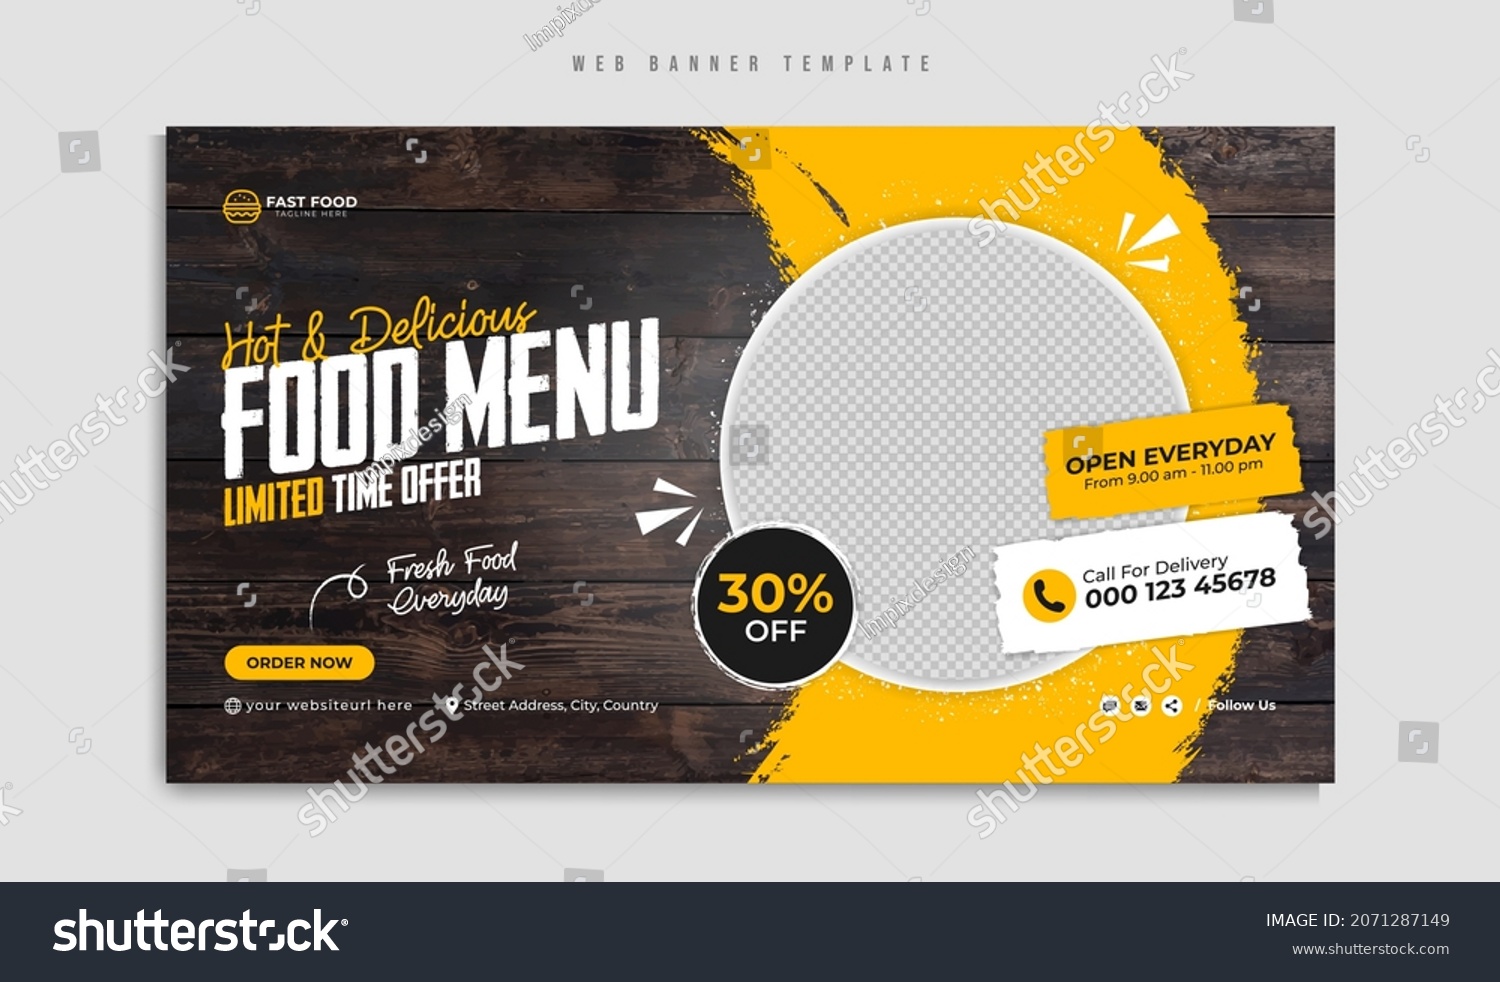 Fast food restaurant menu social media marketing web banner template design. Pizza, burger and healthy food business online promotion flyer with abstract background, logo and icon. Sale cover. #2071287149